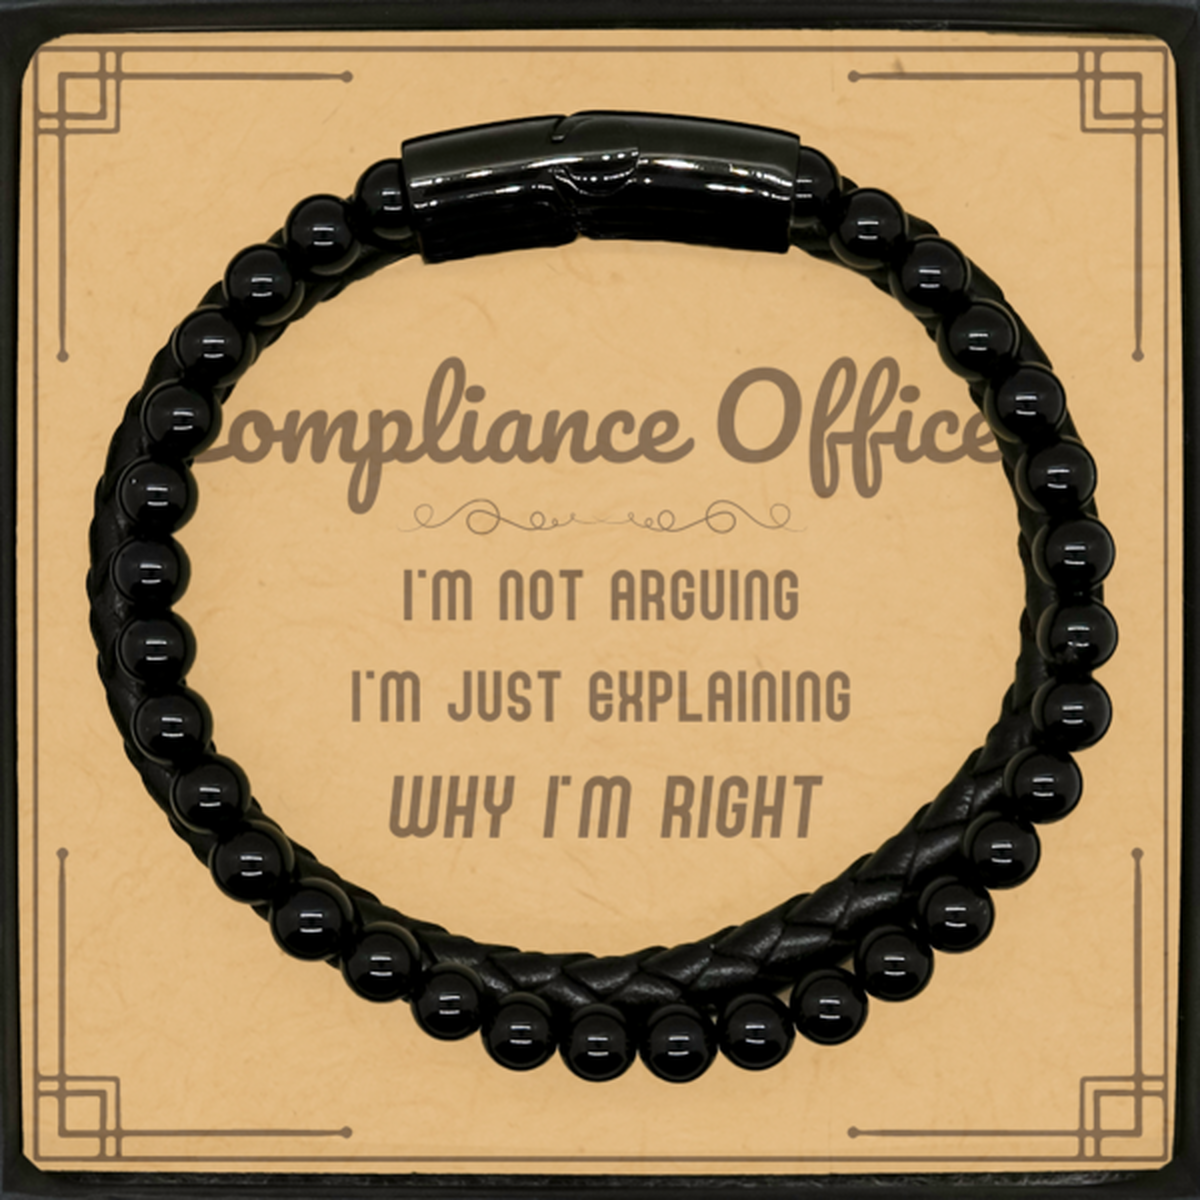 Compliance Officer I'm not Arguing. I'm Just Explaining Why I'm RIGHT Stone Leather Bracelets, Funny Saying Quote Compliance Officer Gifts For Compliance Officer Message Card Graduation Birthday Christmas Gifts for Men Women Coworker